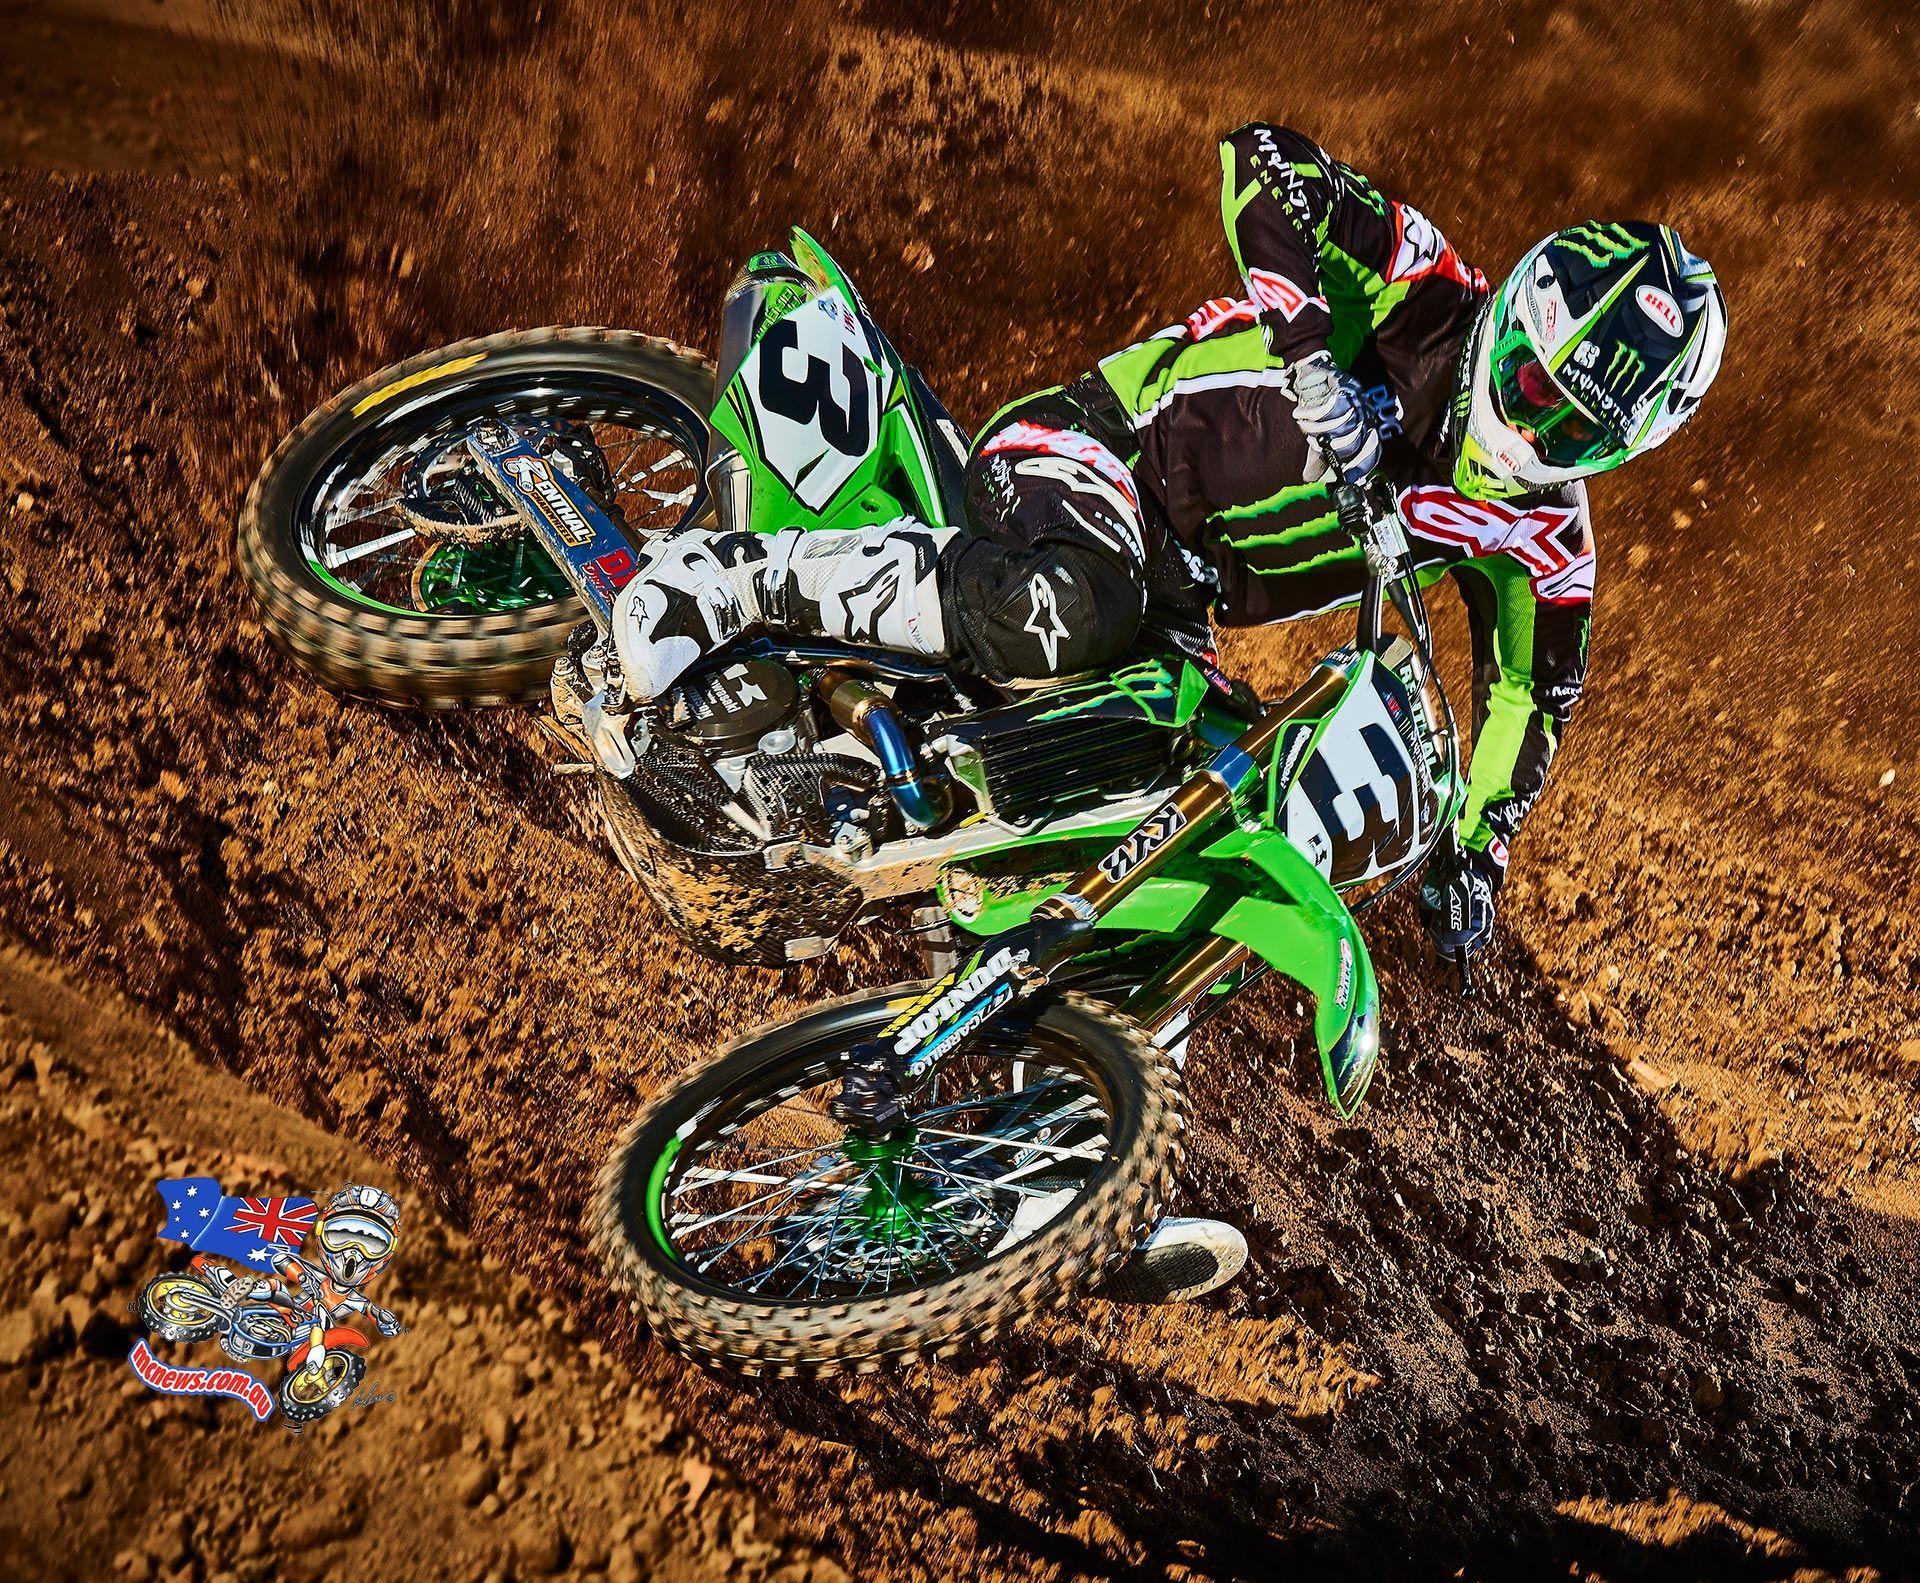 Eli Tomac Posters for Sale  Redbubble